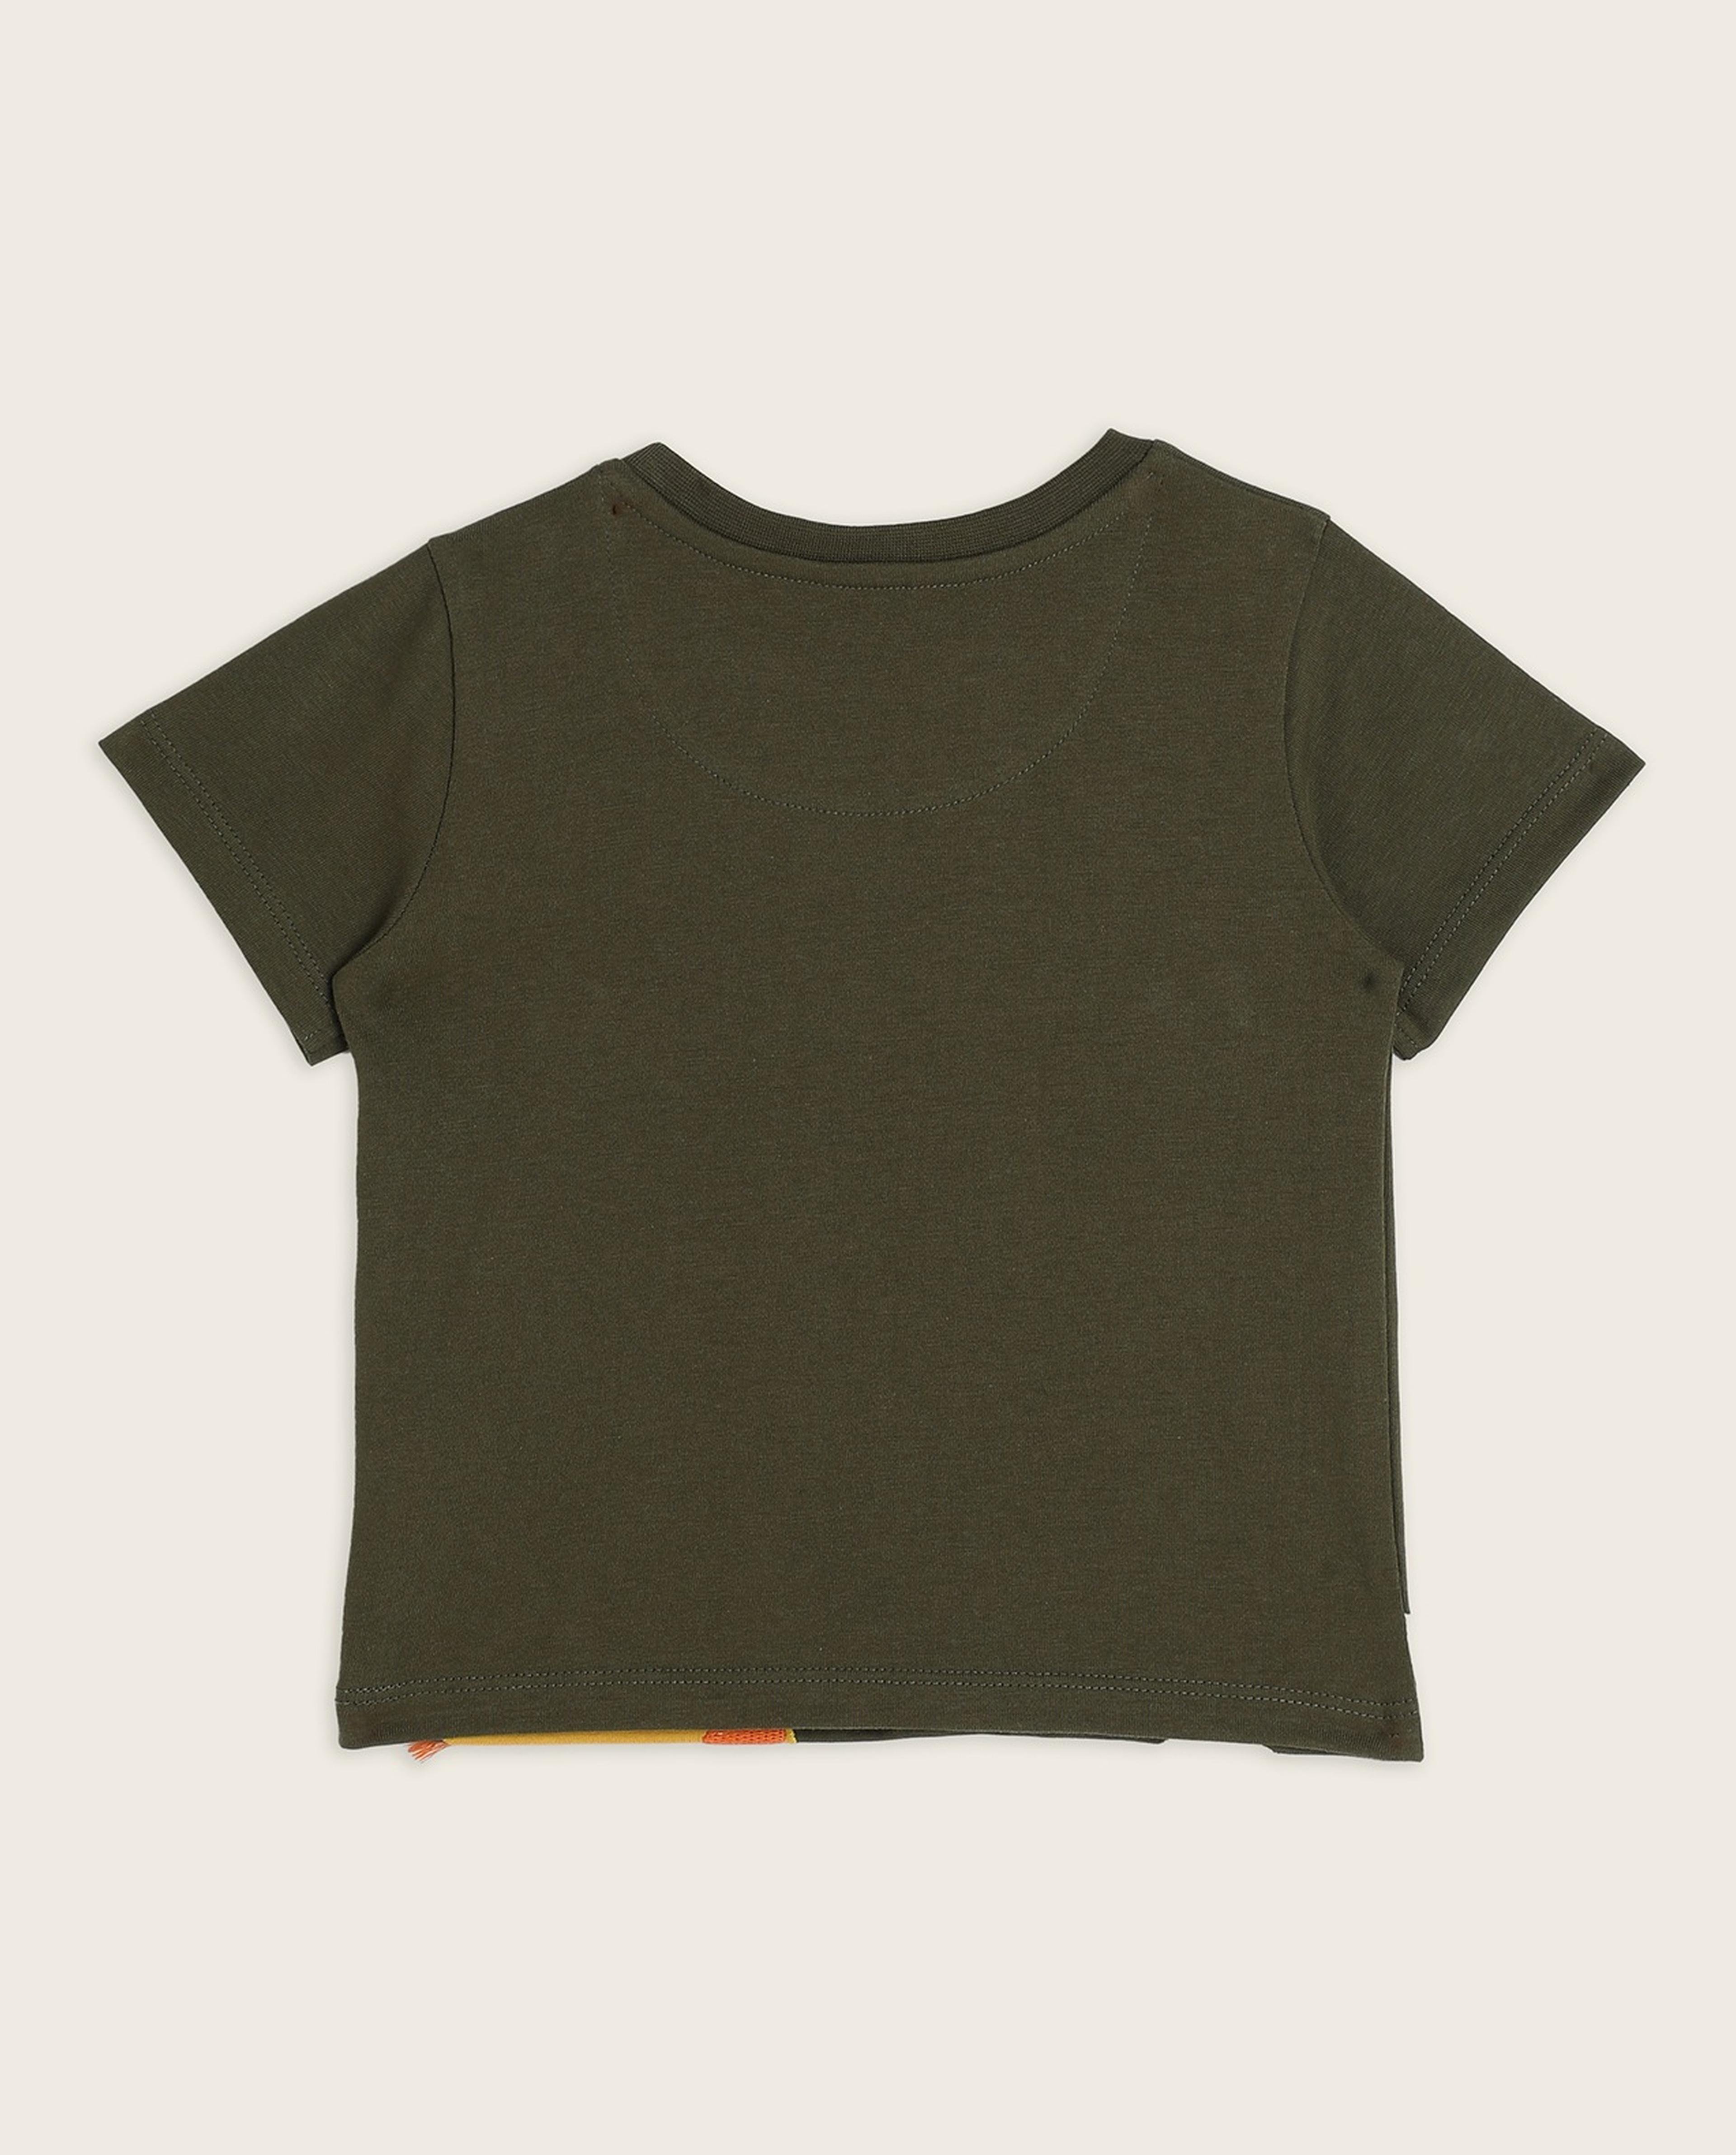 Embroidered T-Shirt with Crew Neck and Short Sleeves